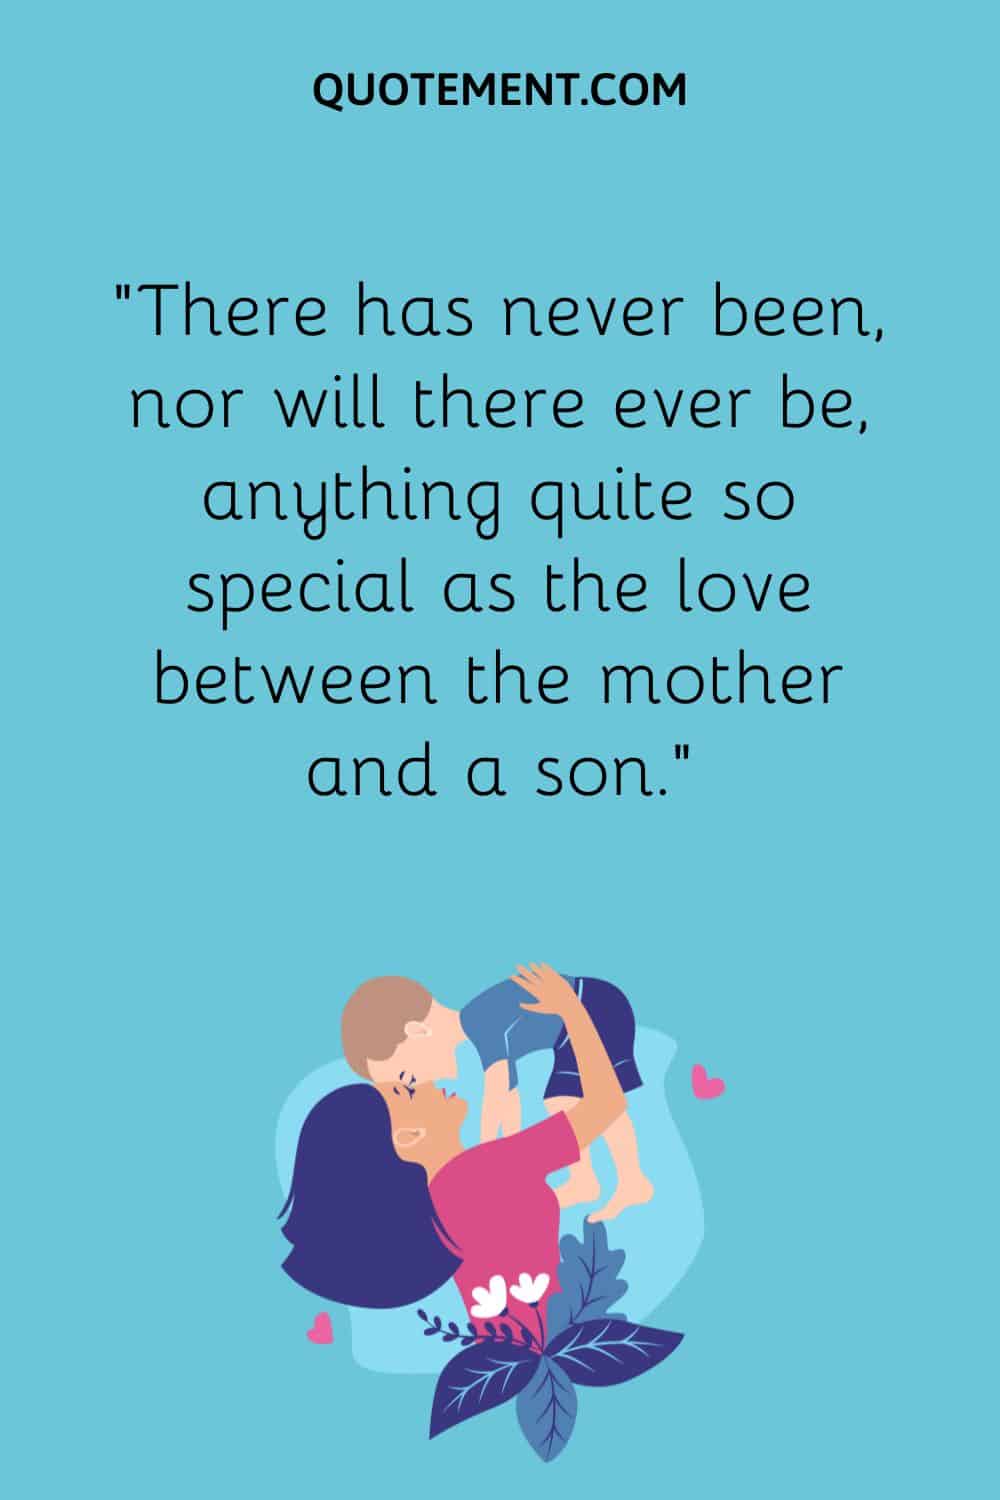 “There has never been, nor will there ever be, anything quite so special as the love between the mother and a son.”